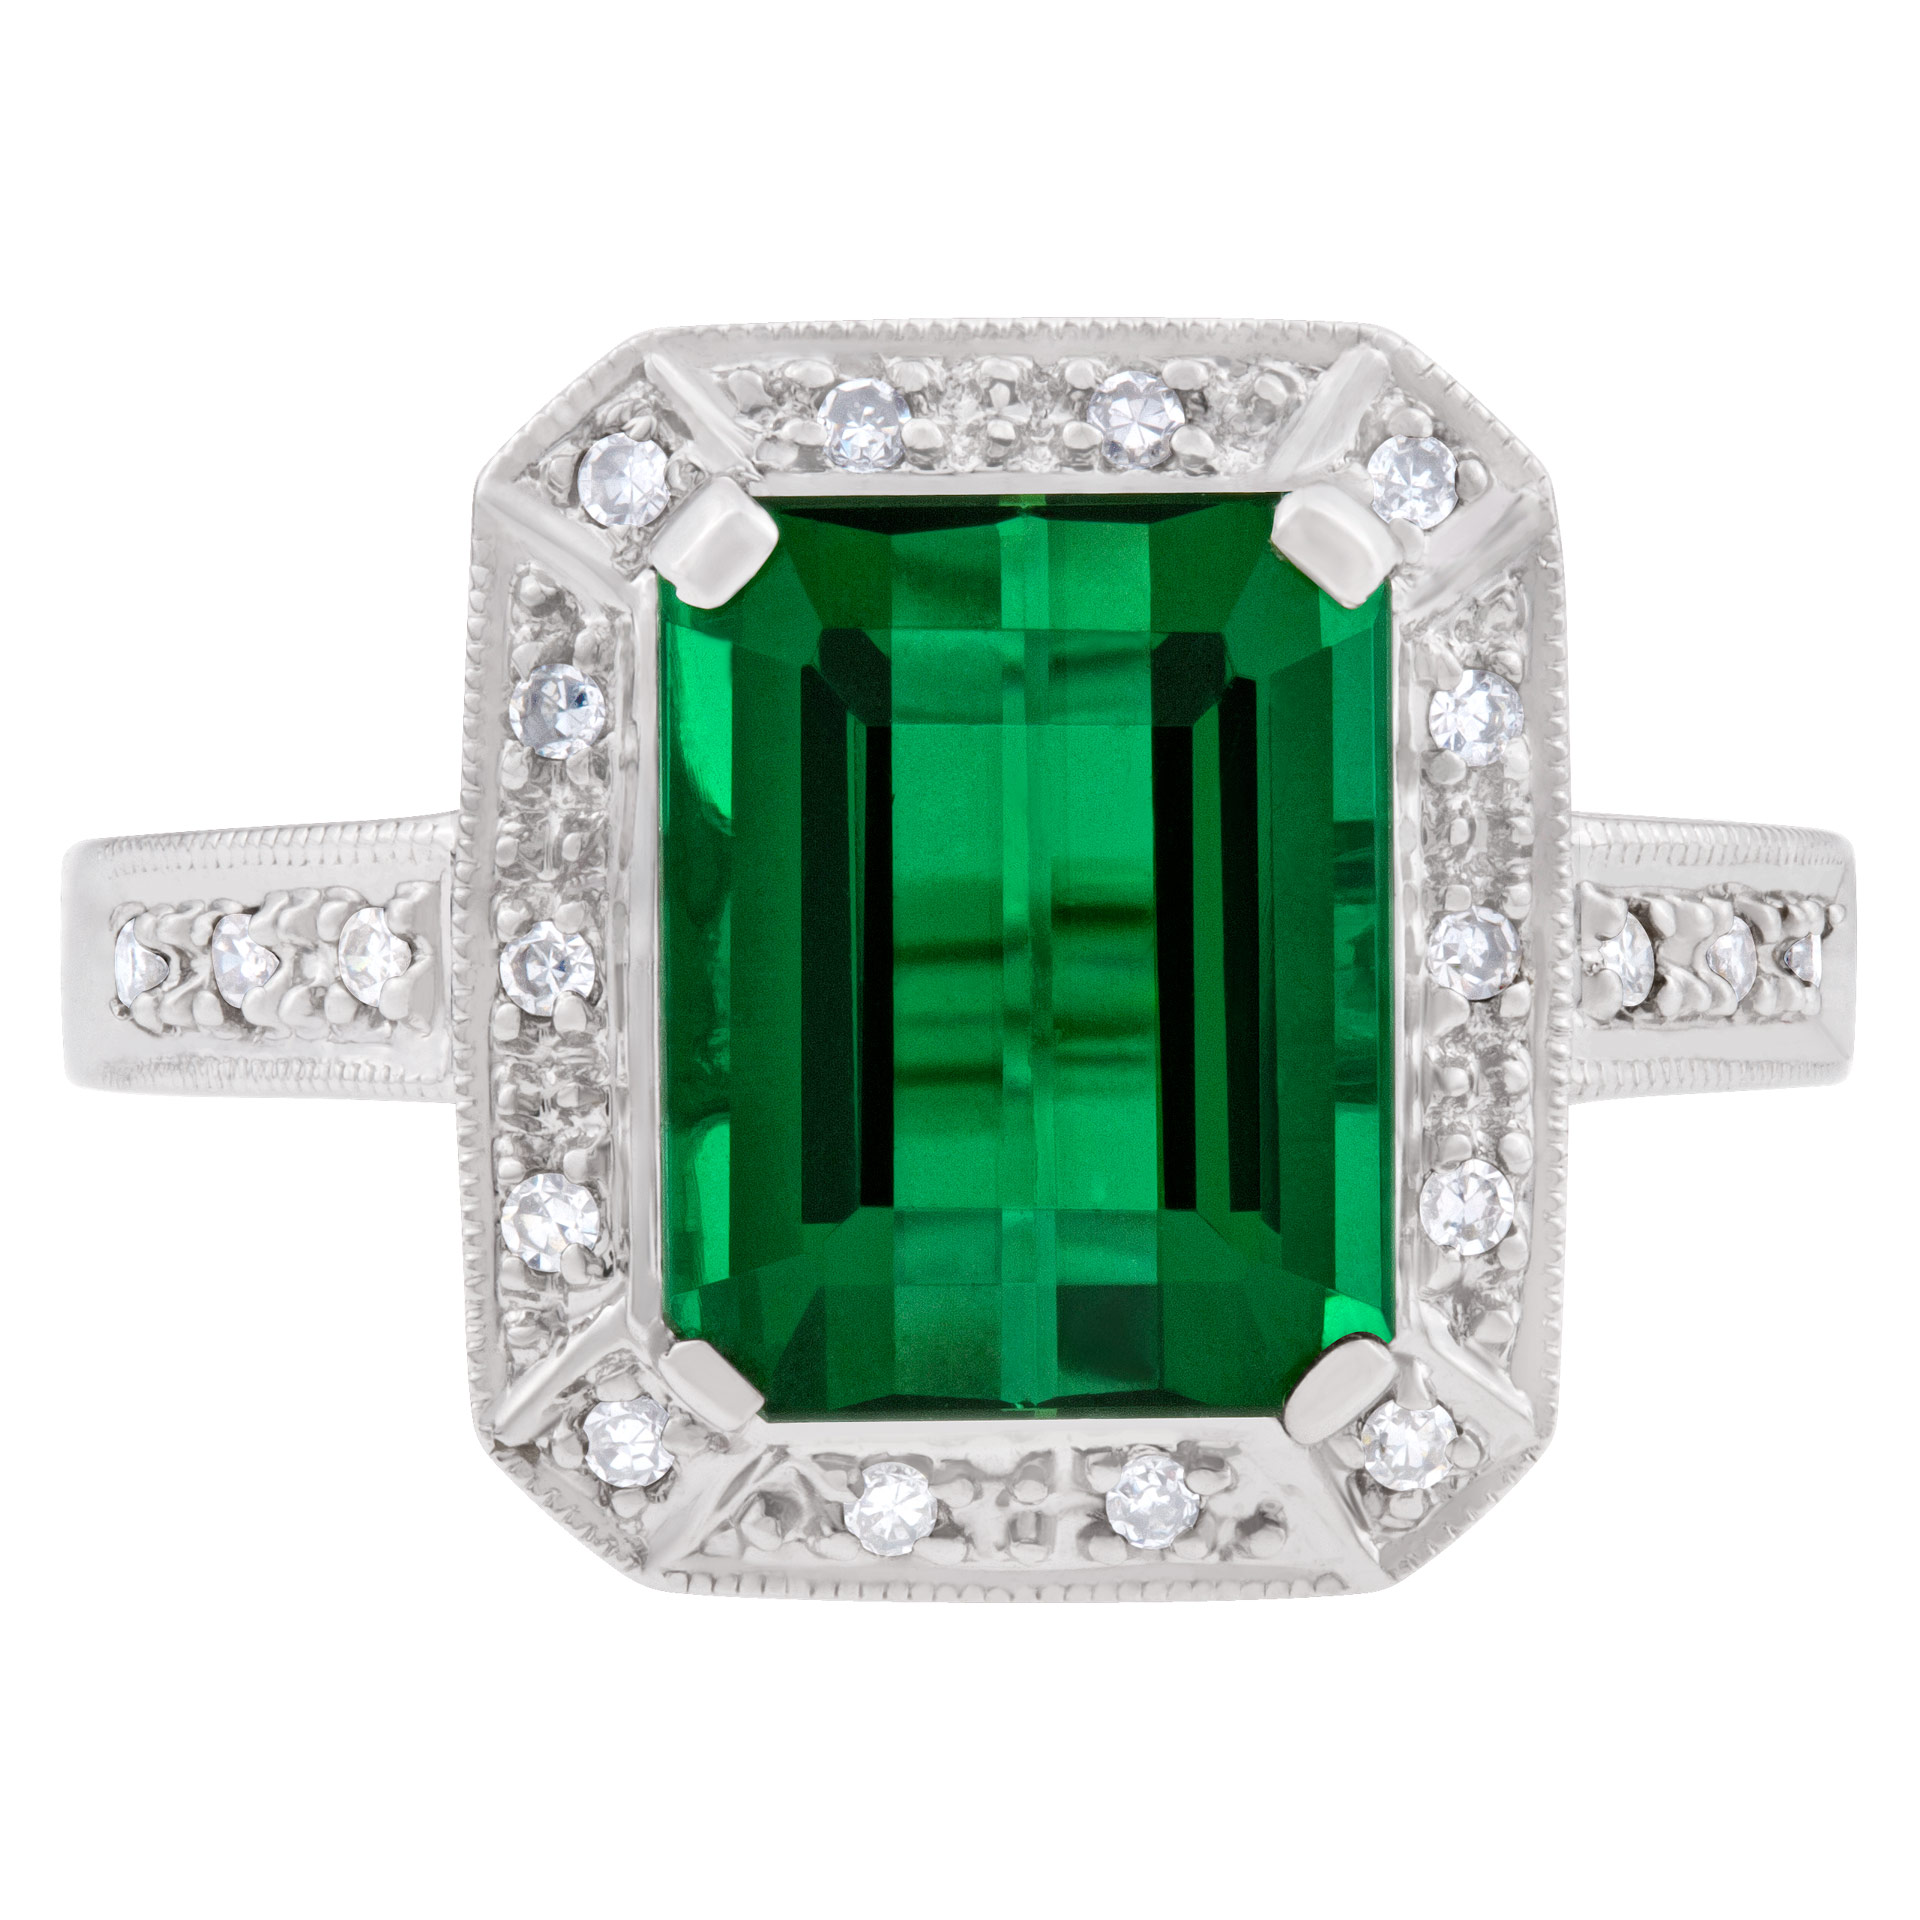 Green Tourmaline ring in 18K white gold 3.75ct diamond accents image 1